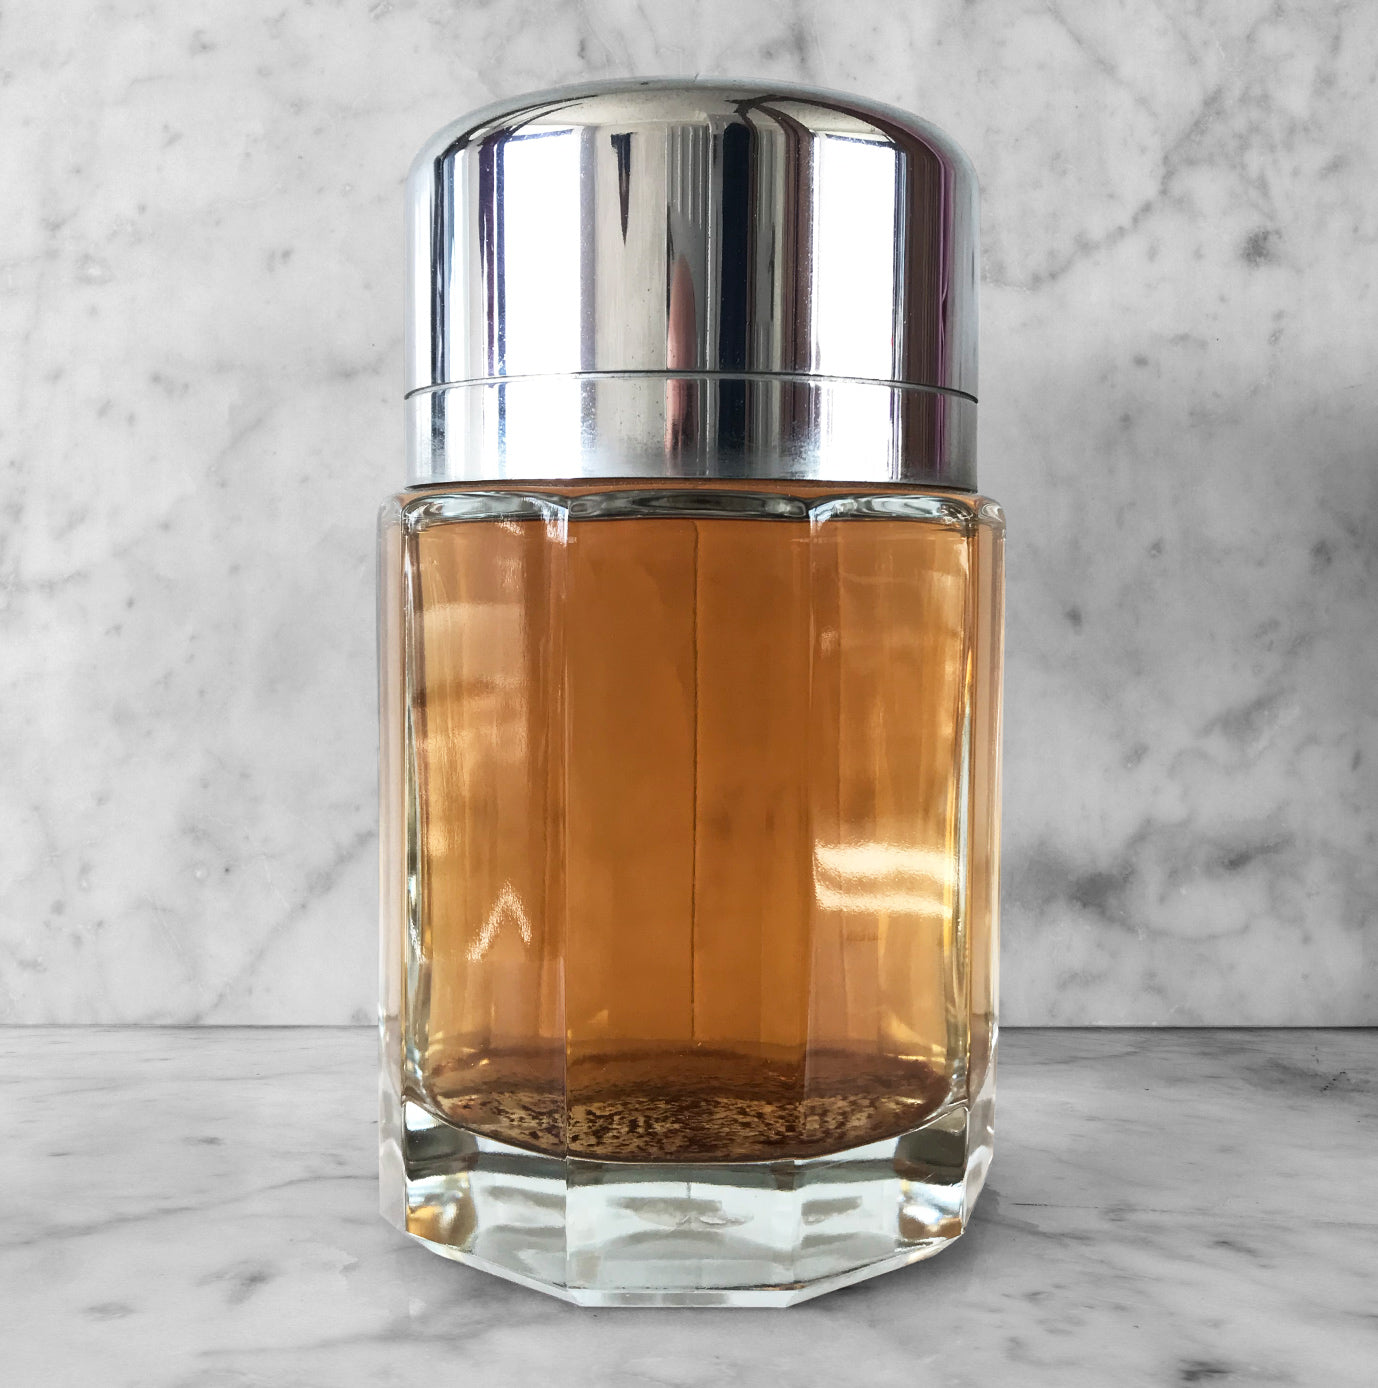 Super large Vintage Factise Bottle for Benetton Tribu. Filled with coloured water, this big bottle would have used for display at a perfume counter or shop window. A great piece to display in the bathroom or on the dressing table - SHOP NOW - www.intovintage.co.uk